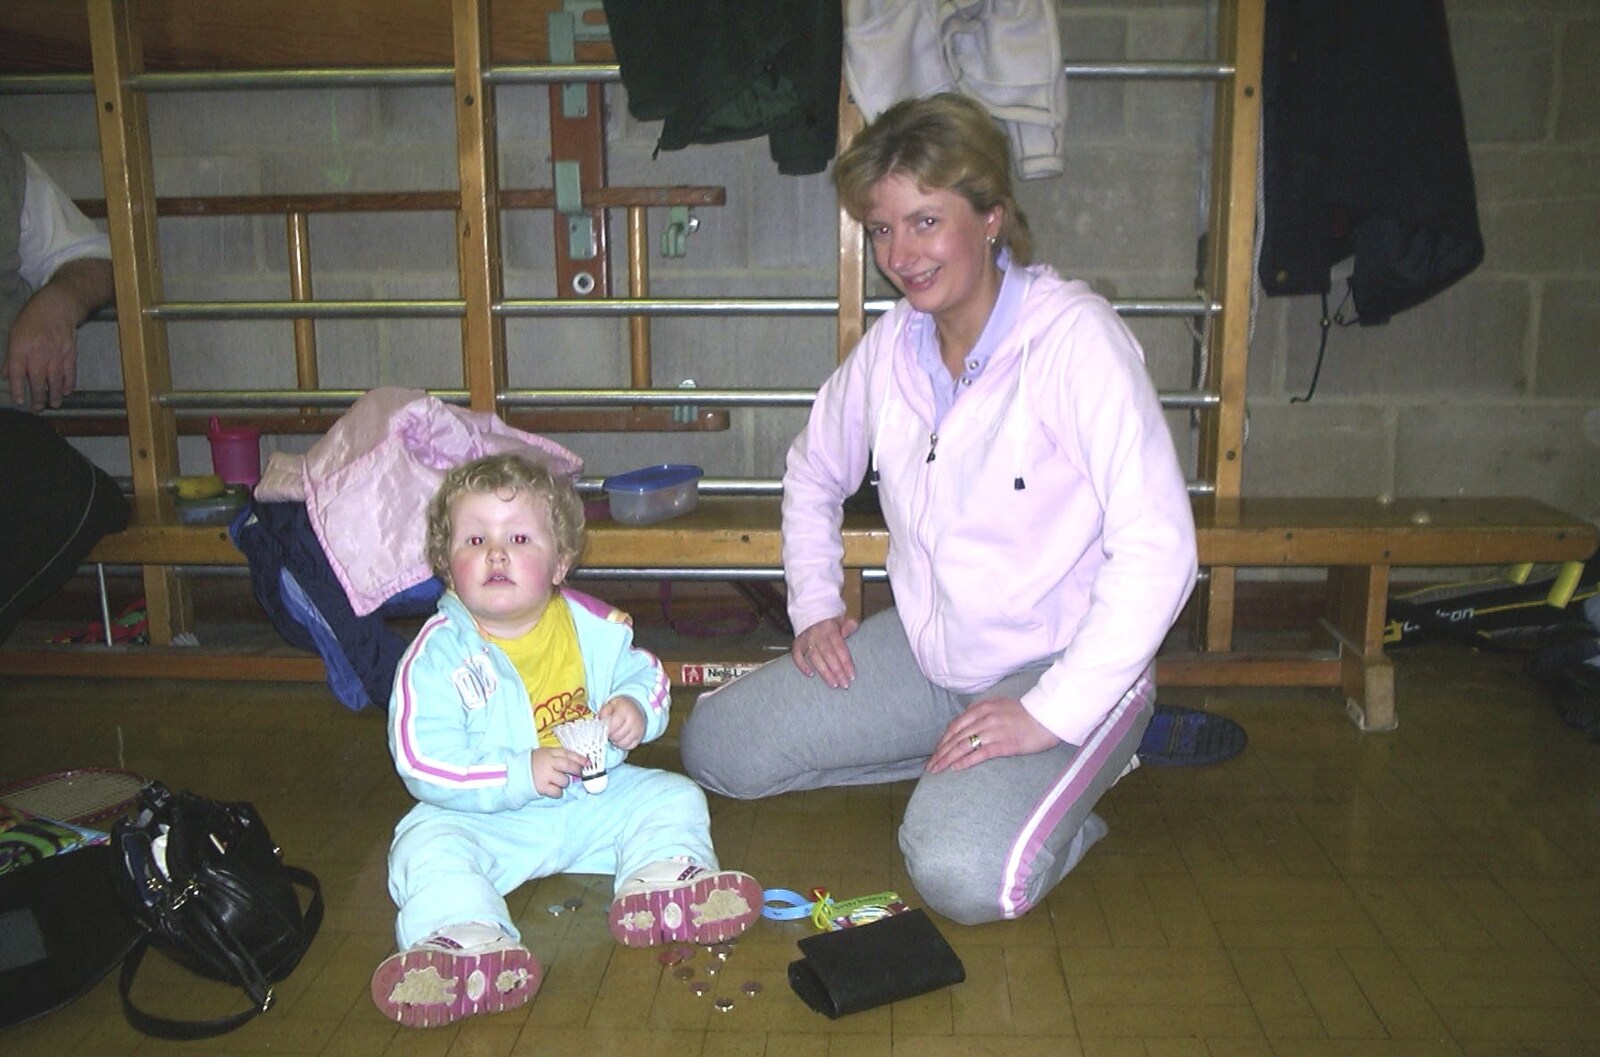 Theresa brings her sprog along to badminton from Badminton Sprogs and The Skelton Festival, Diss, Norfolk - 1st May 2004